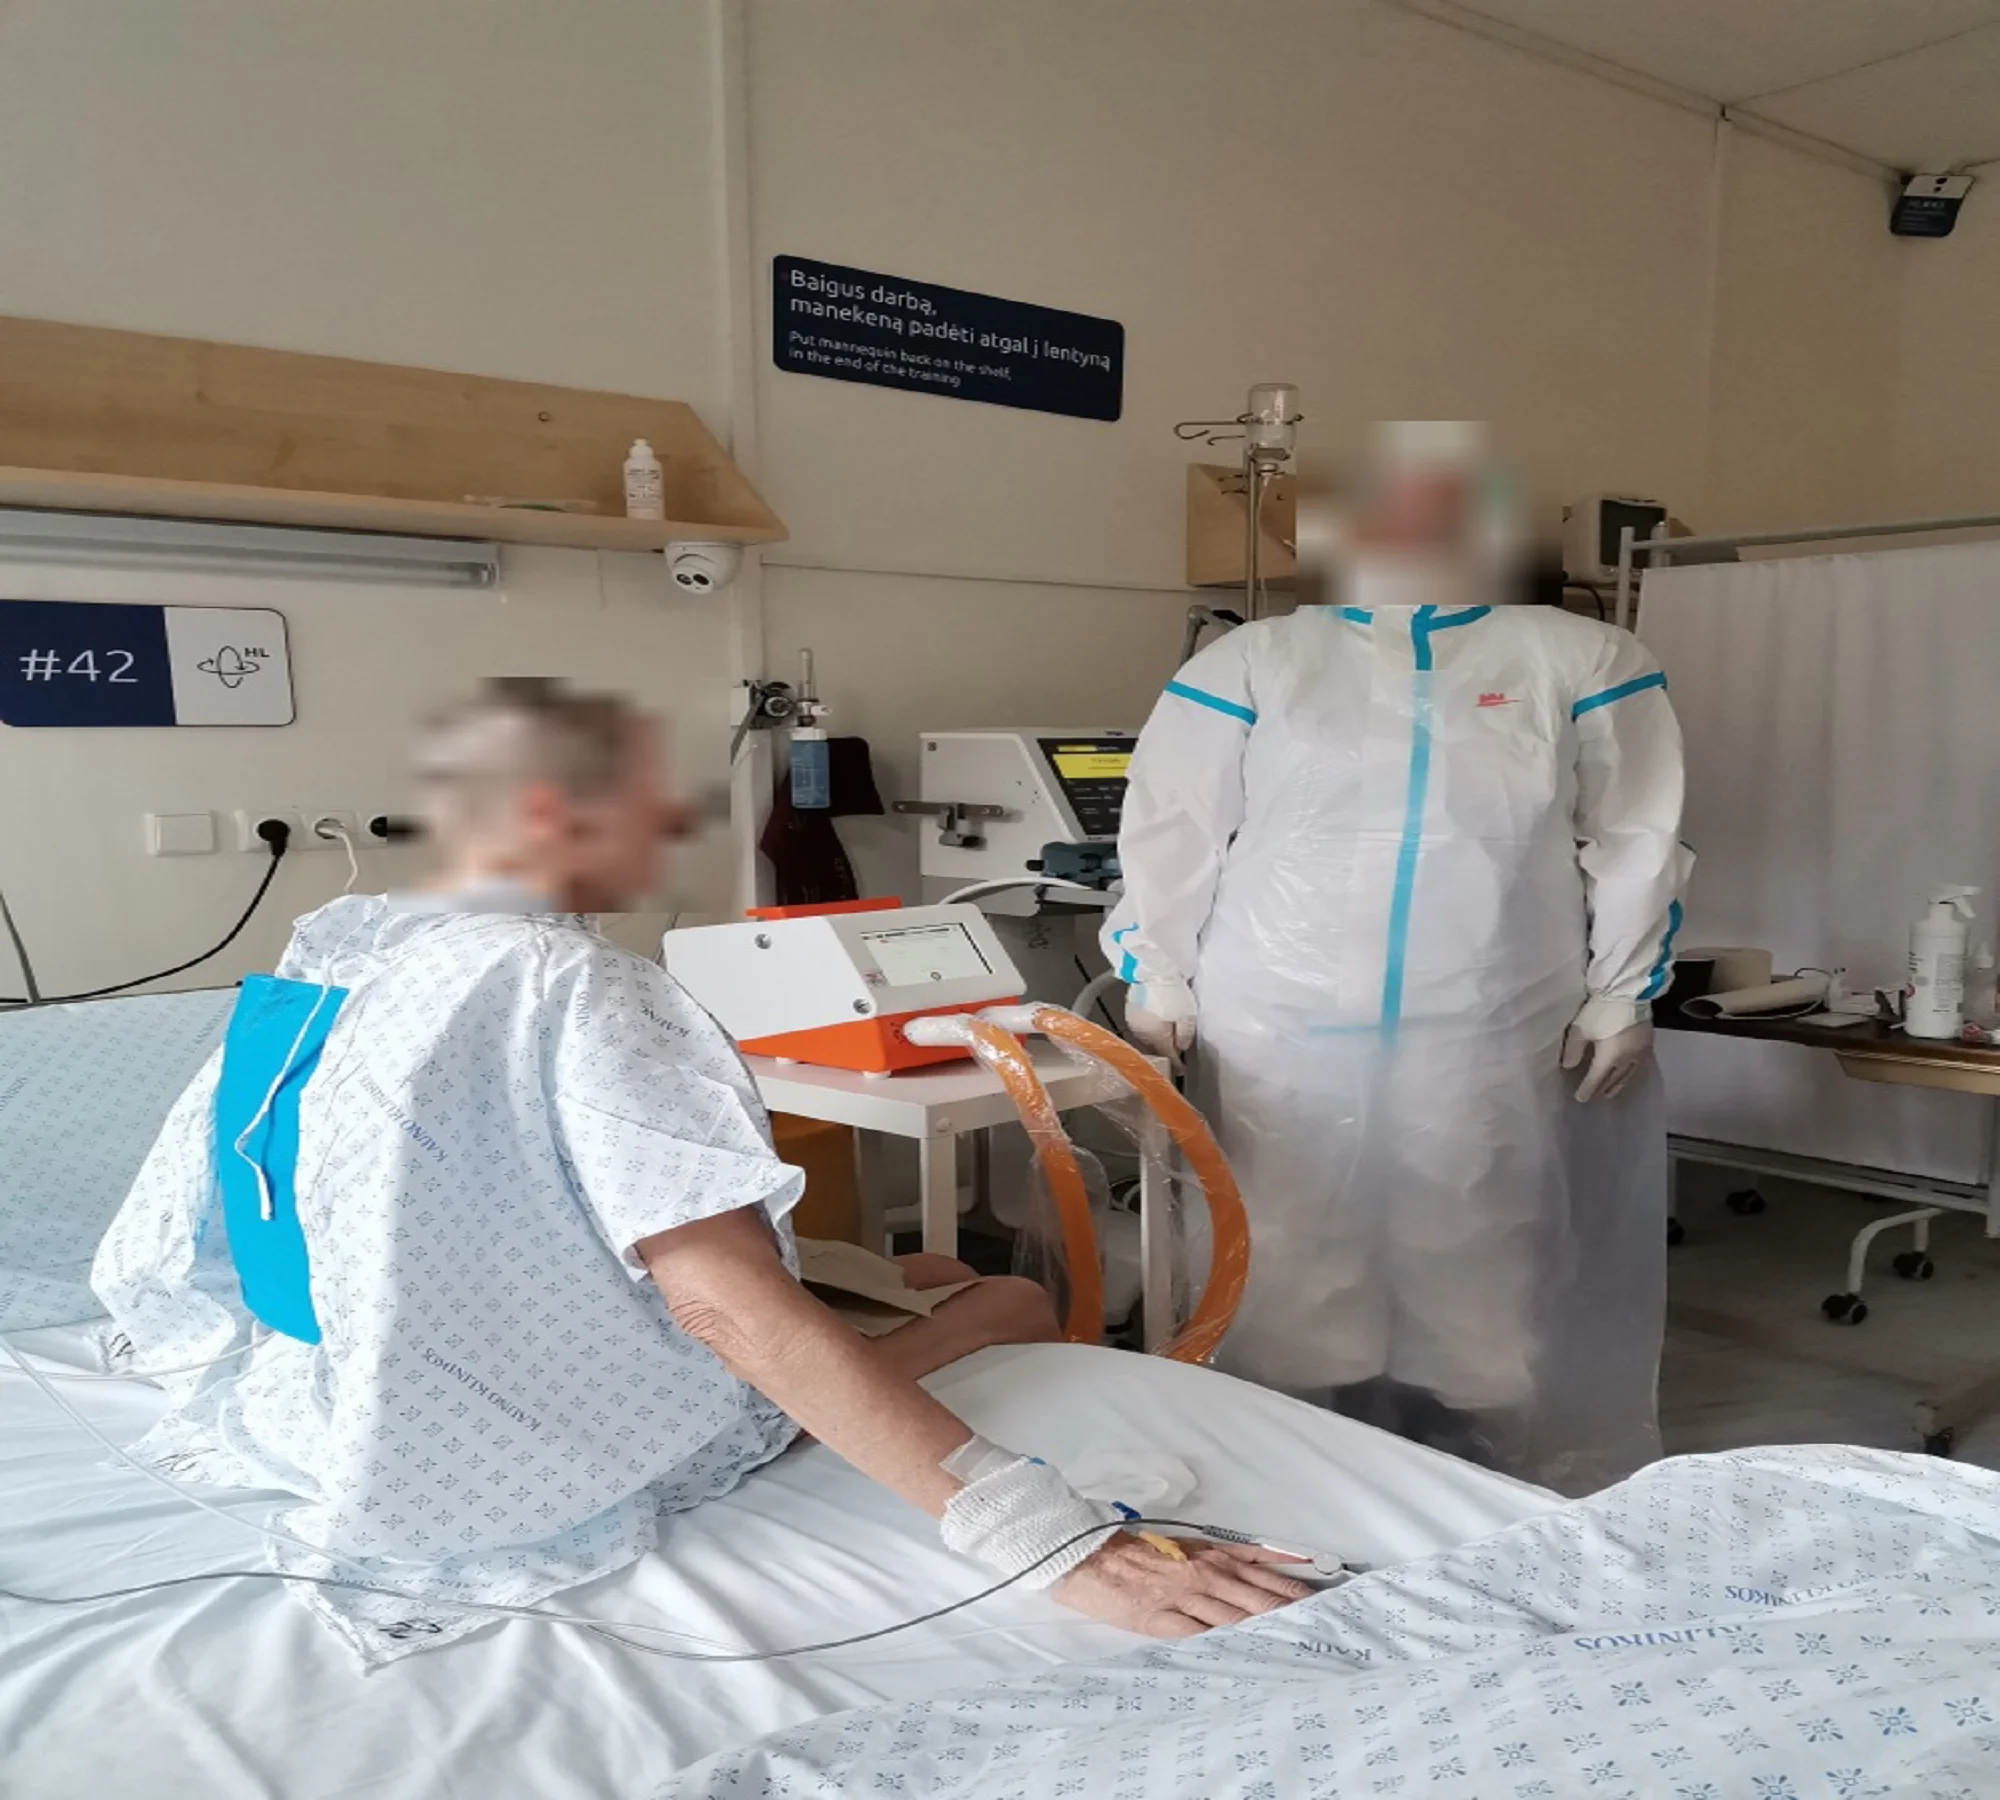 Early physiotherapy and chest wall oscillation in patients with COVID-19 disease at the intensive care unit: a pilot clinical trial